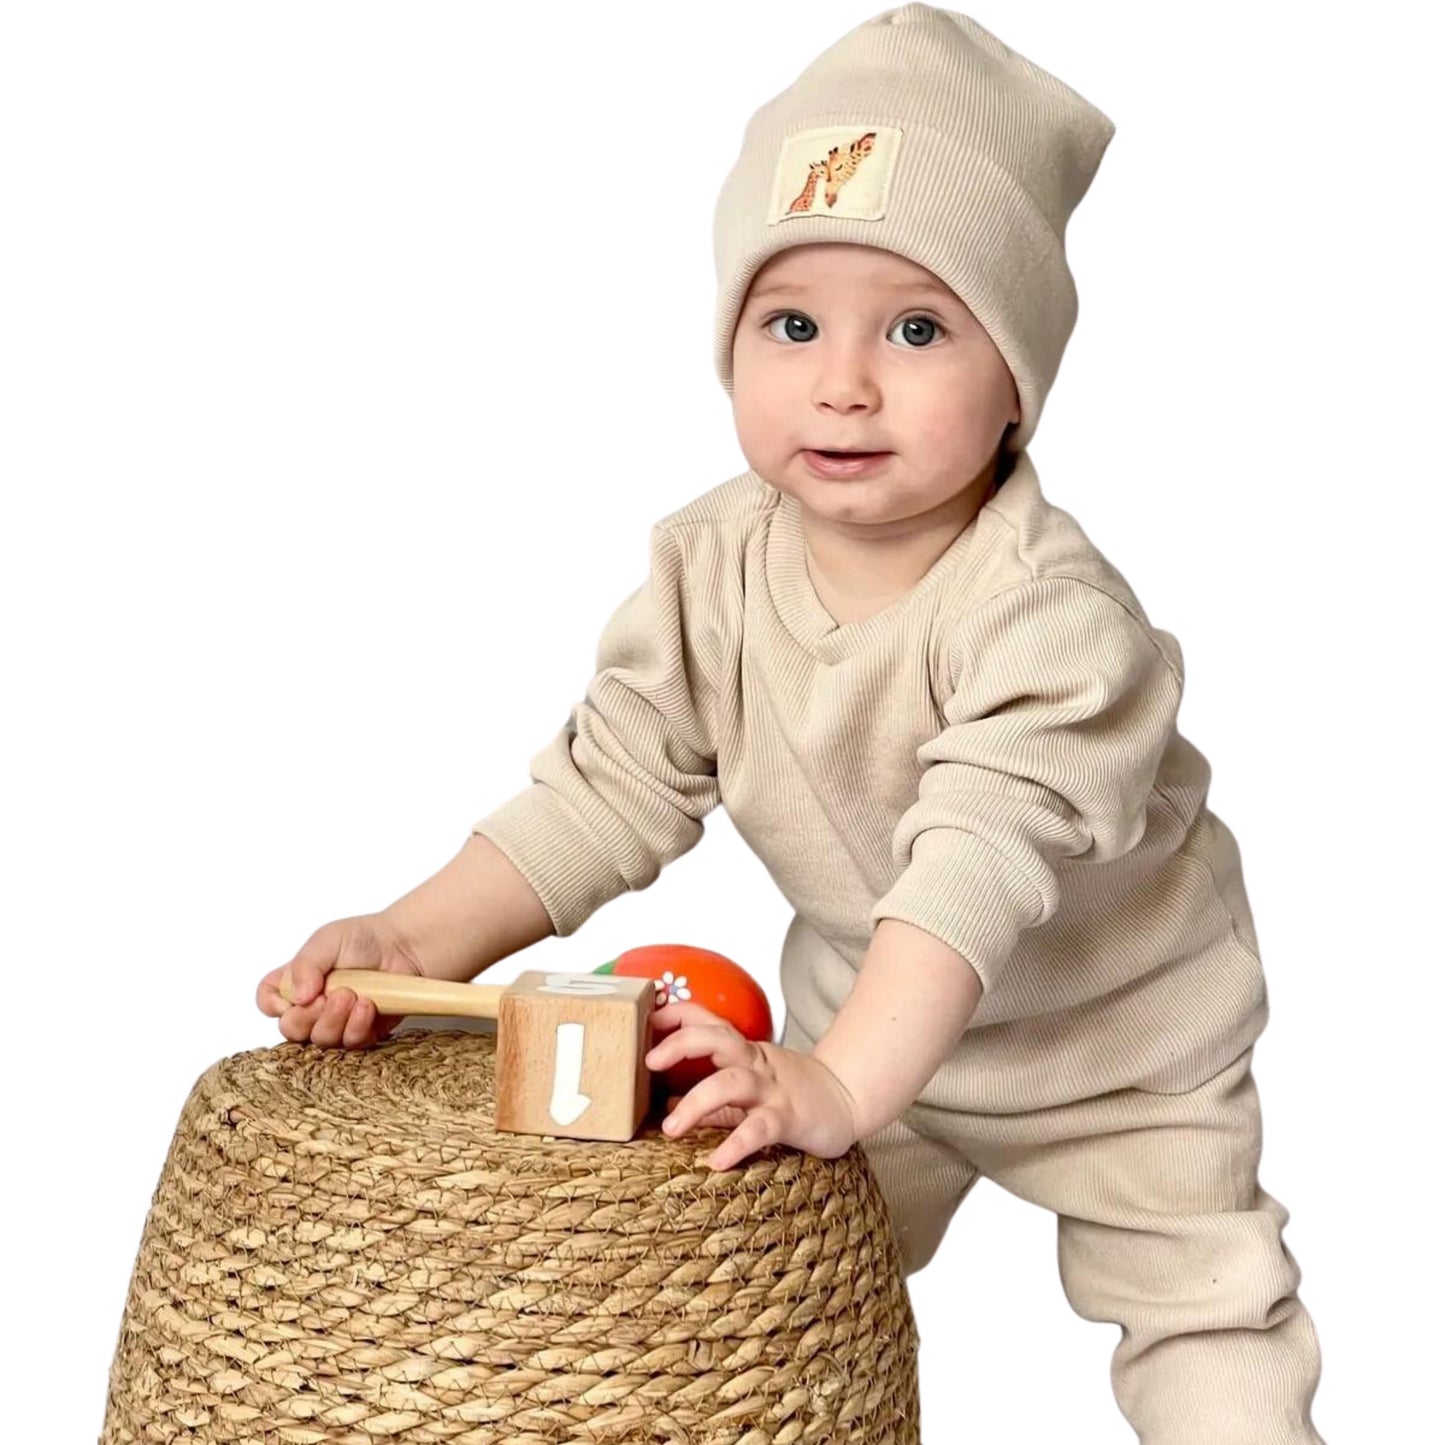 KidsKiddy™ - Cotton 3-piece Top, Bottom, and Beanie Hat Set for Babies and Toddlers